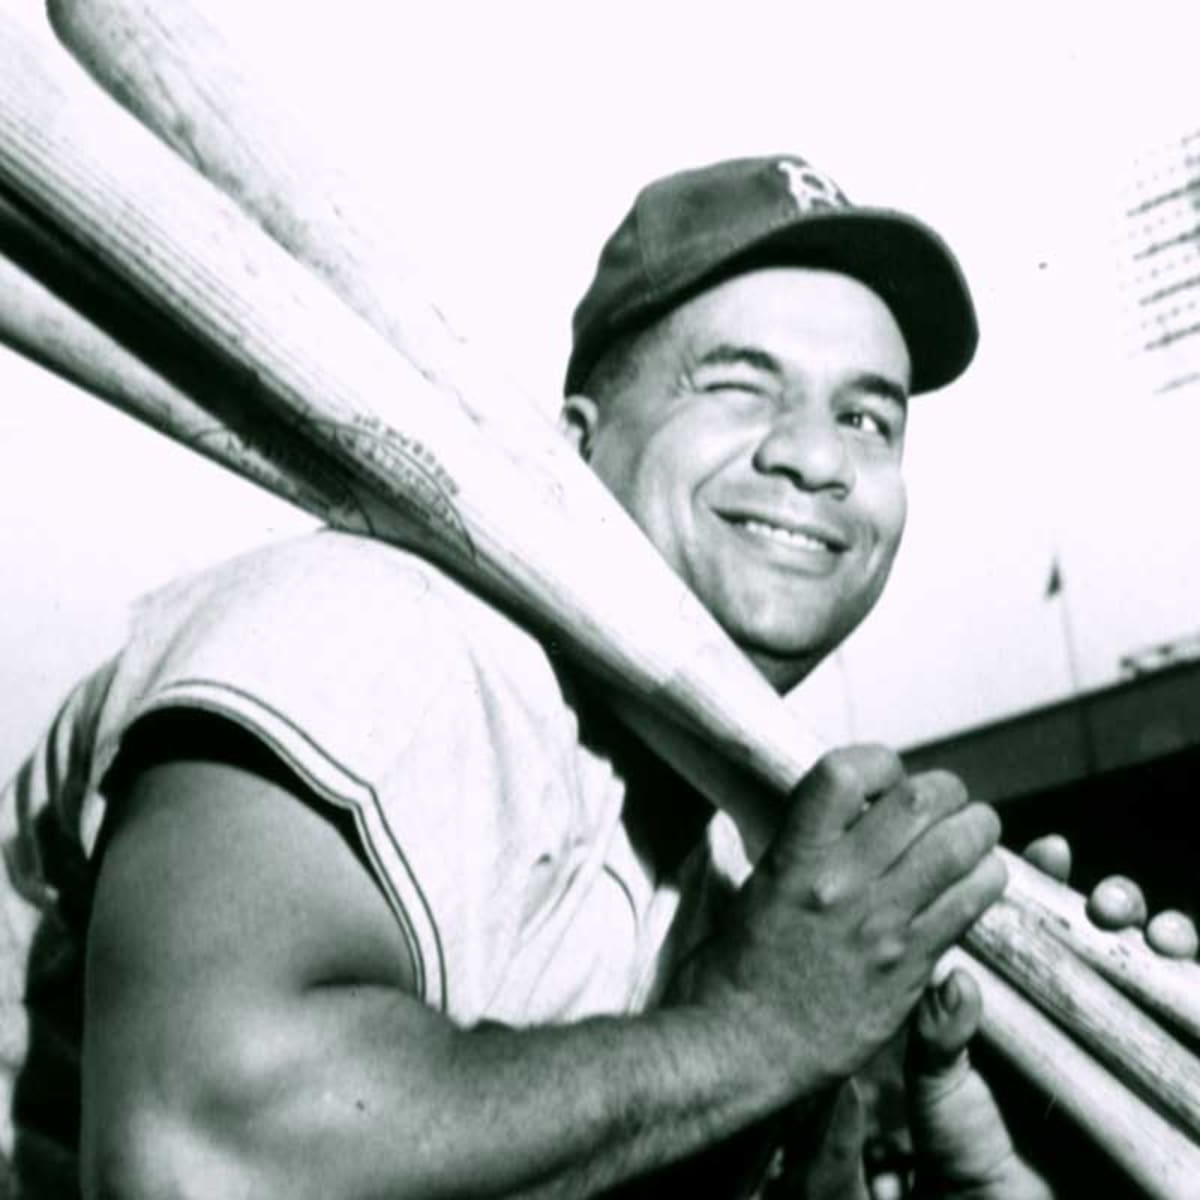 Baseball In Pics - Roy Campanella, Larry Doby, Don Newcombe, and